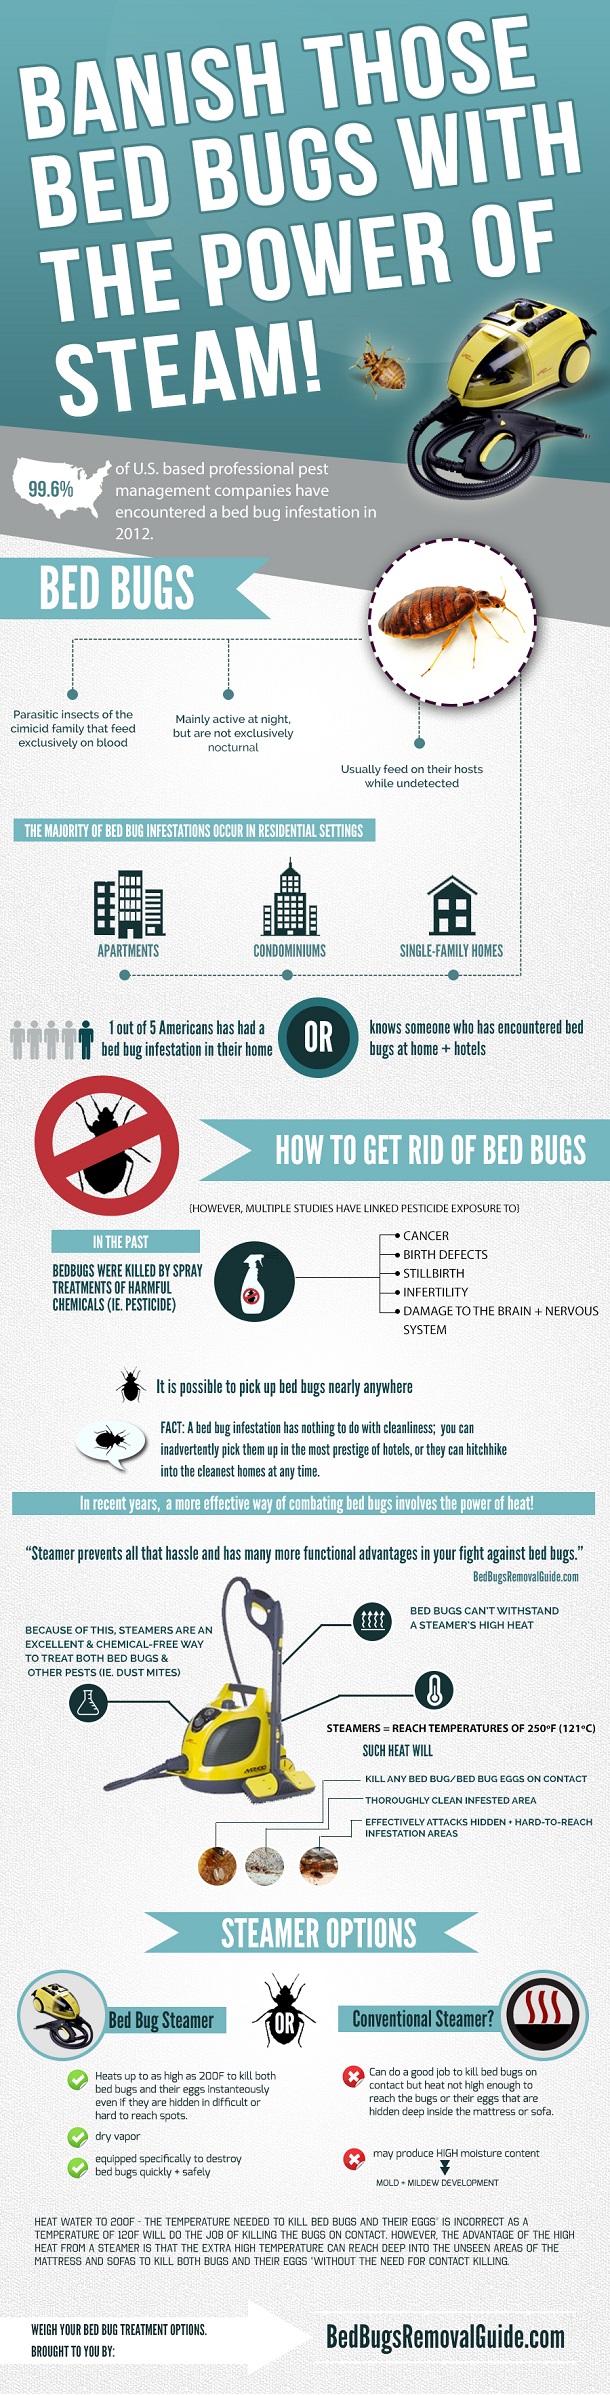 Banish Those Bed Bugs With The Power of Steam